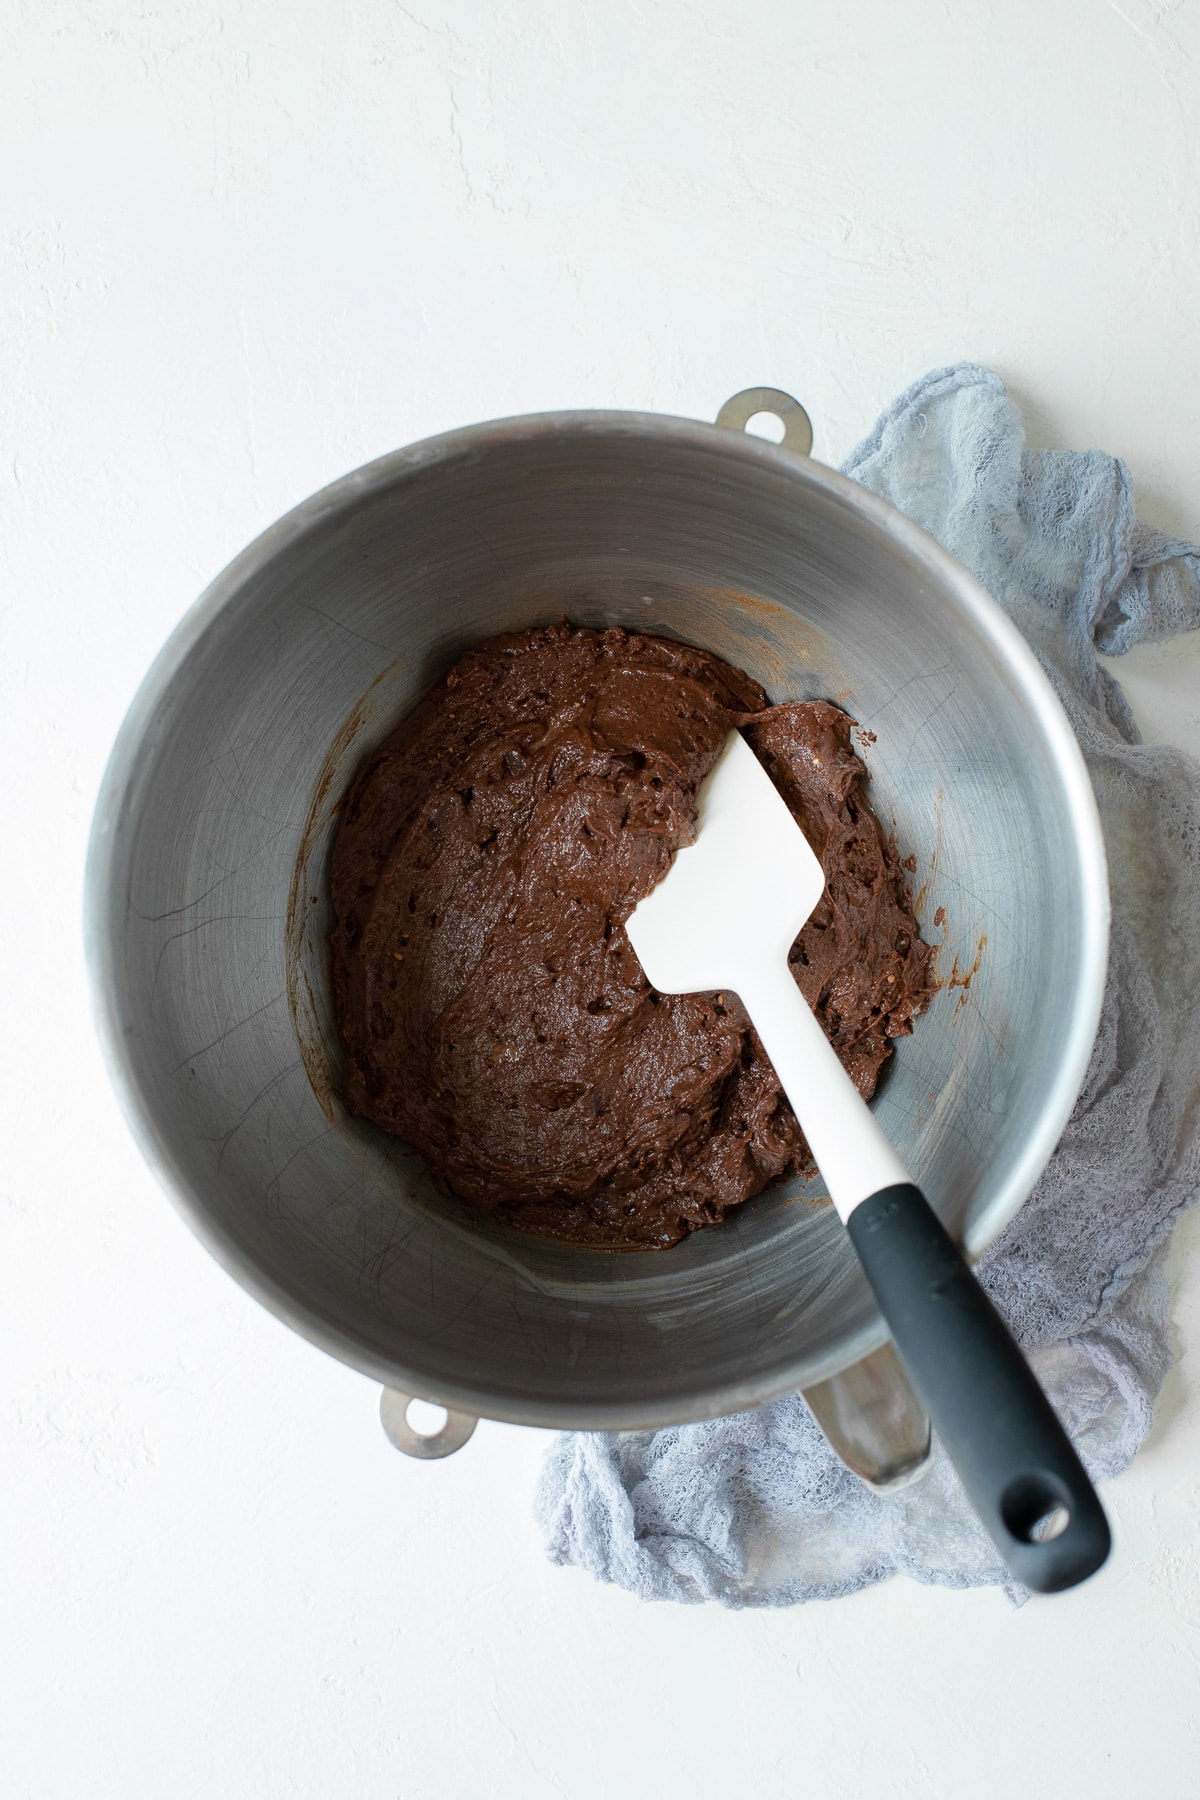 Chocolate muffin batter being mixed with a spatula in a bowl.